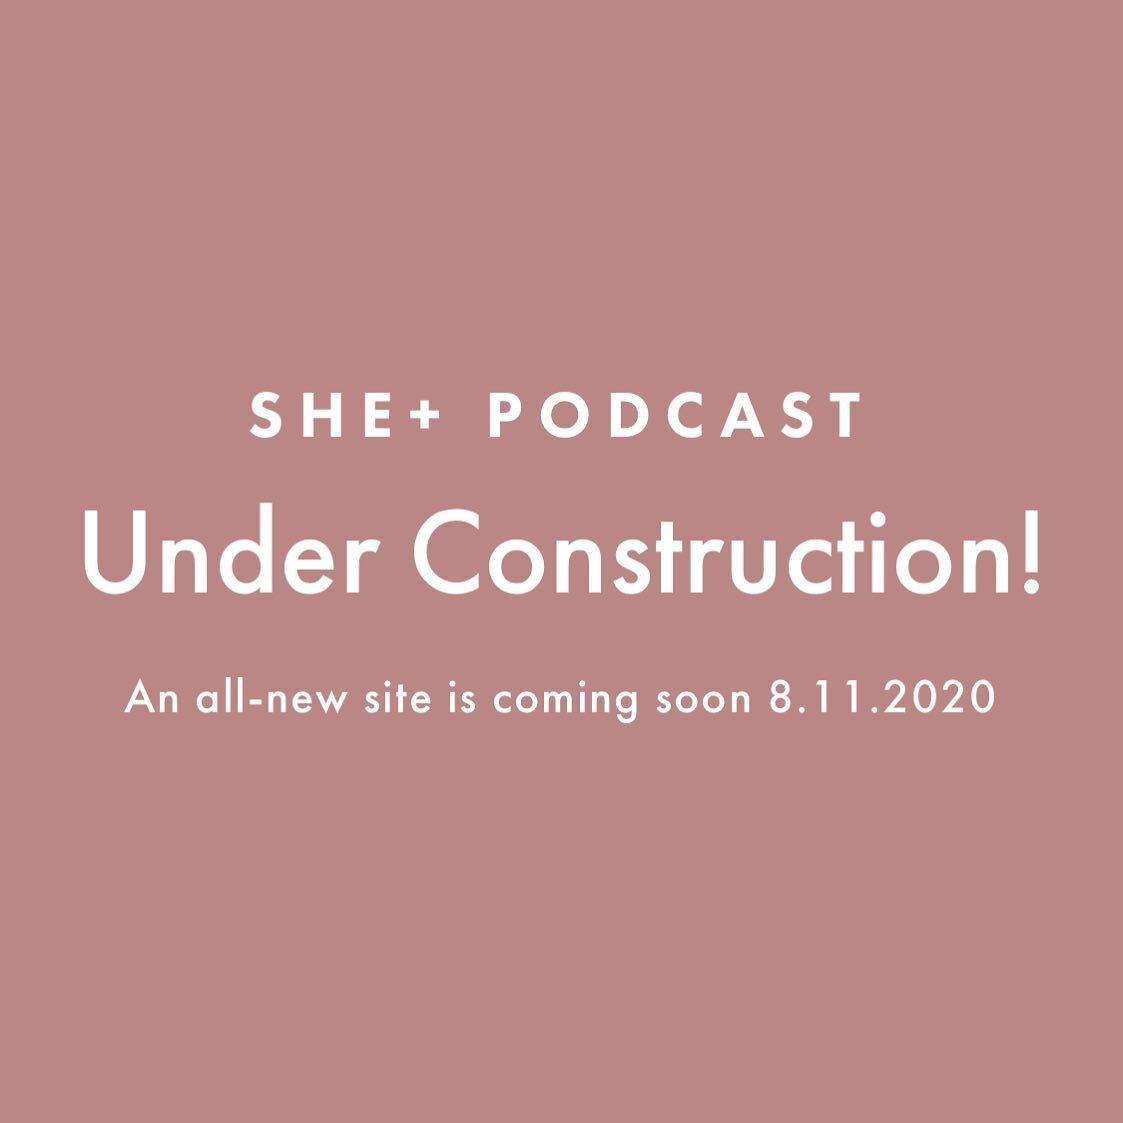 Told ya that some exciting, new things are in the works! 😍😍😍
//
An all new website coming to you this Friday! Anddddd maybe a few other things too 🤩🥳
//
www.shepluspodcast.com